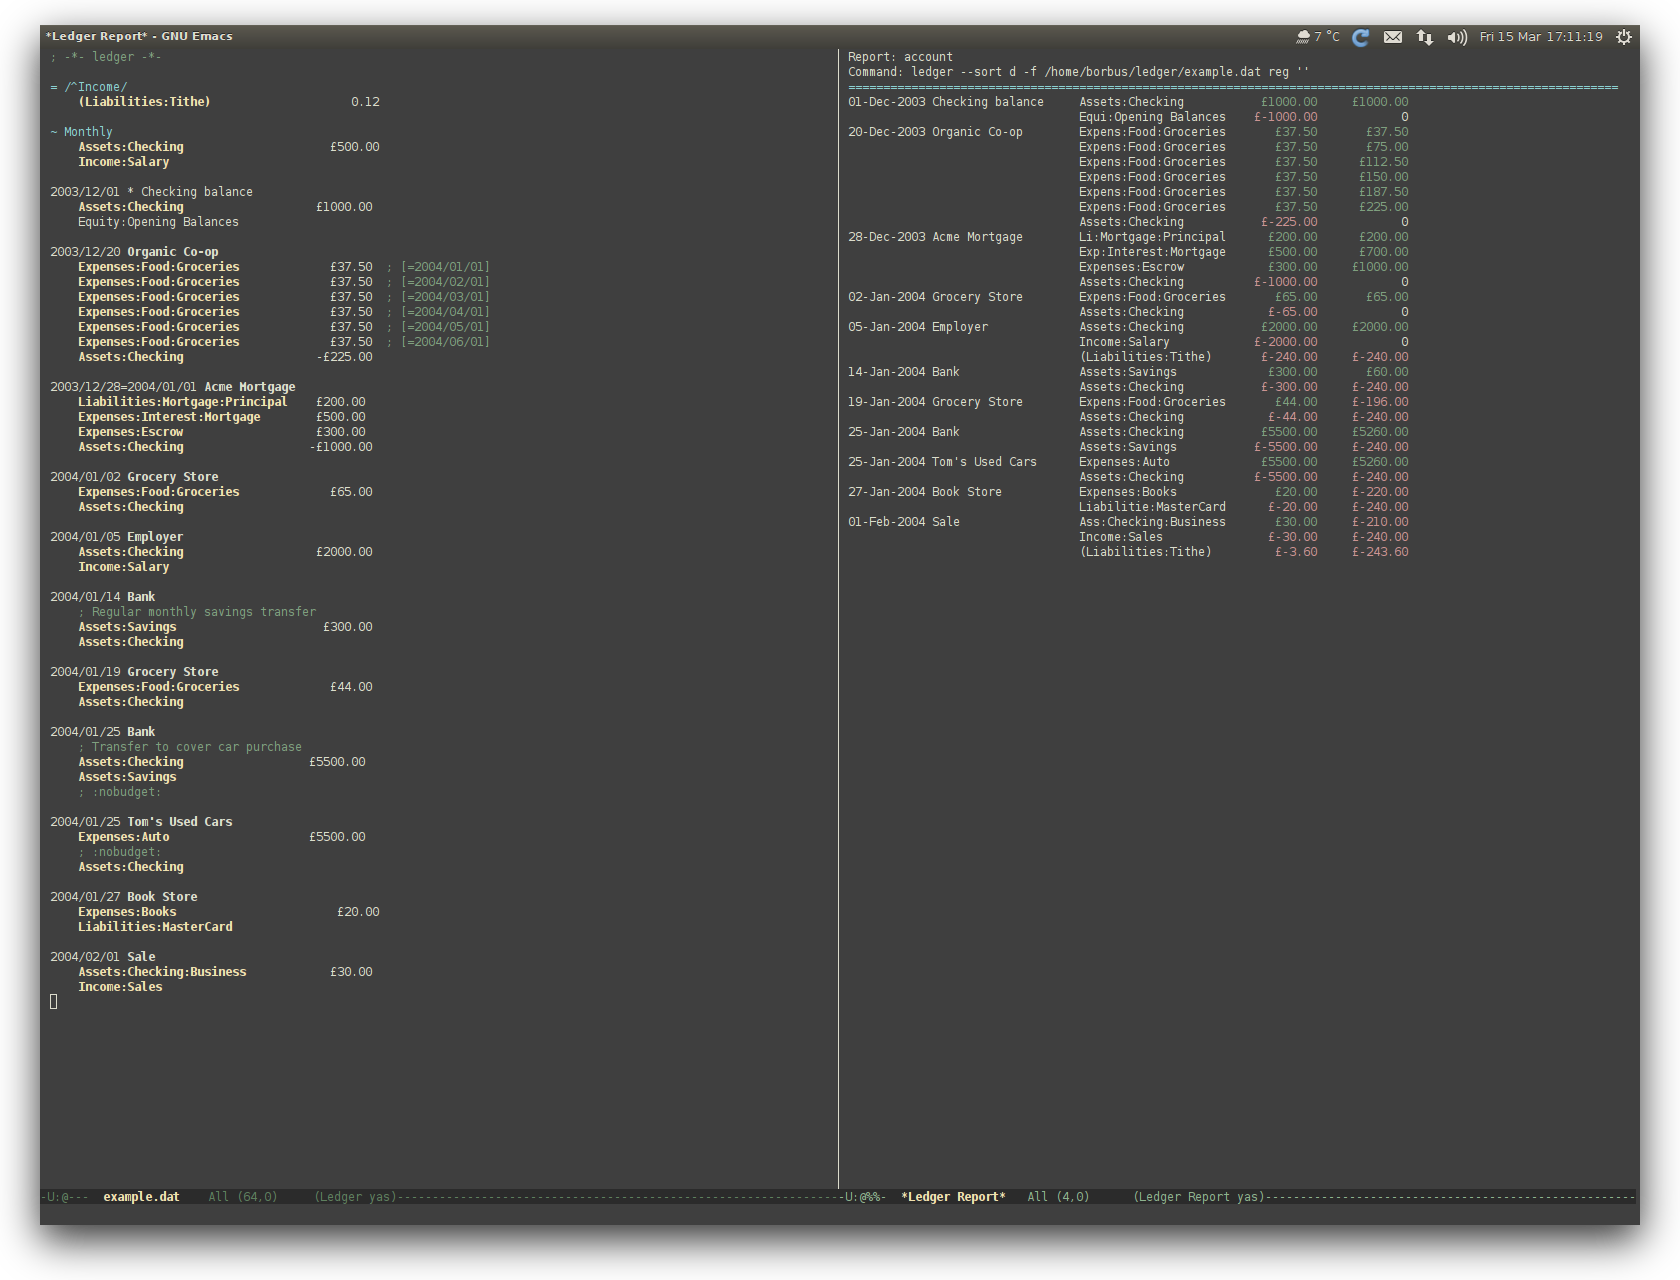 /TakeV/spacemacs/media/commit/8ed77160bb0ad62fb34c2ca2e4000ceecfba362d/layers/finance/img/ledger.png